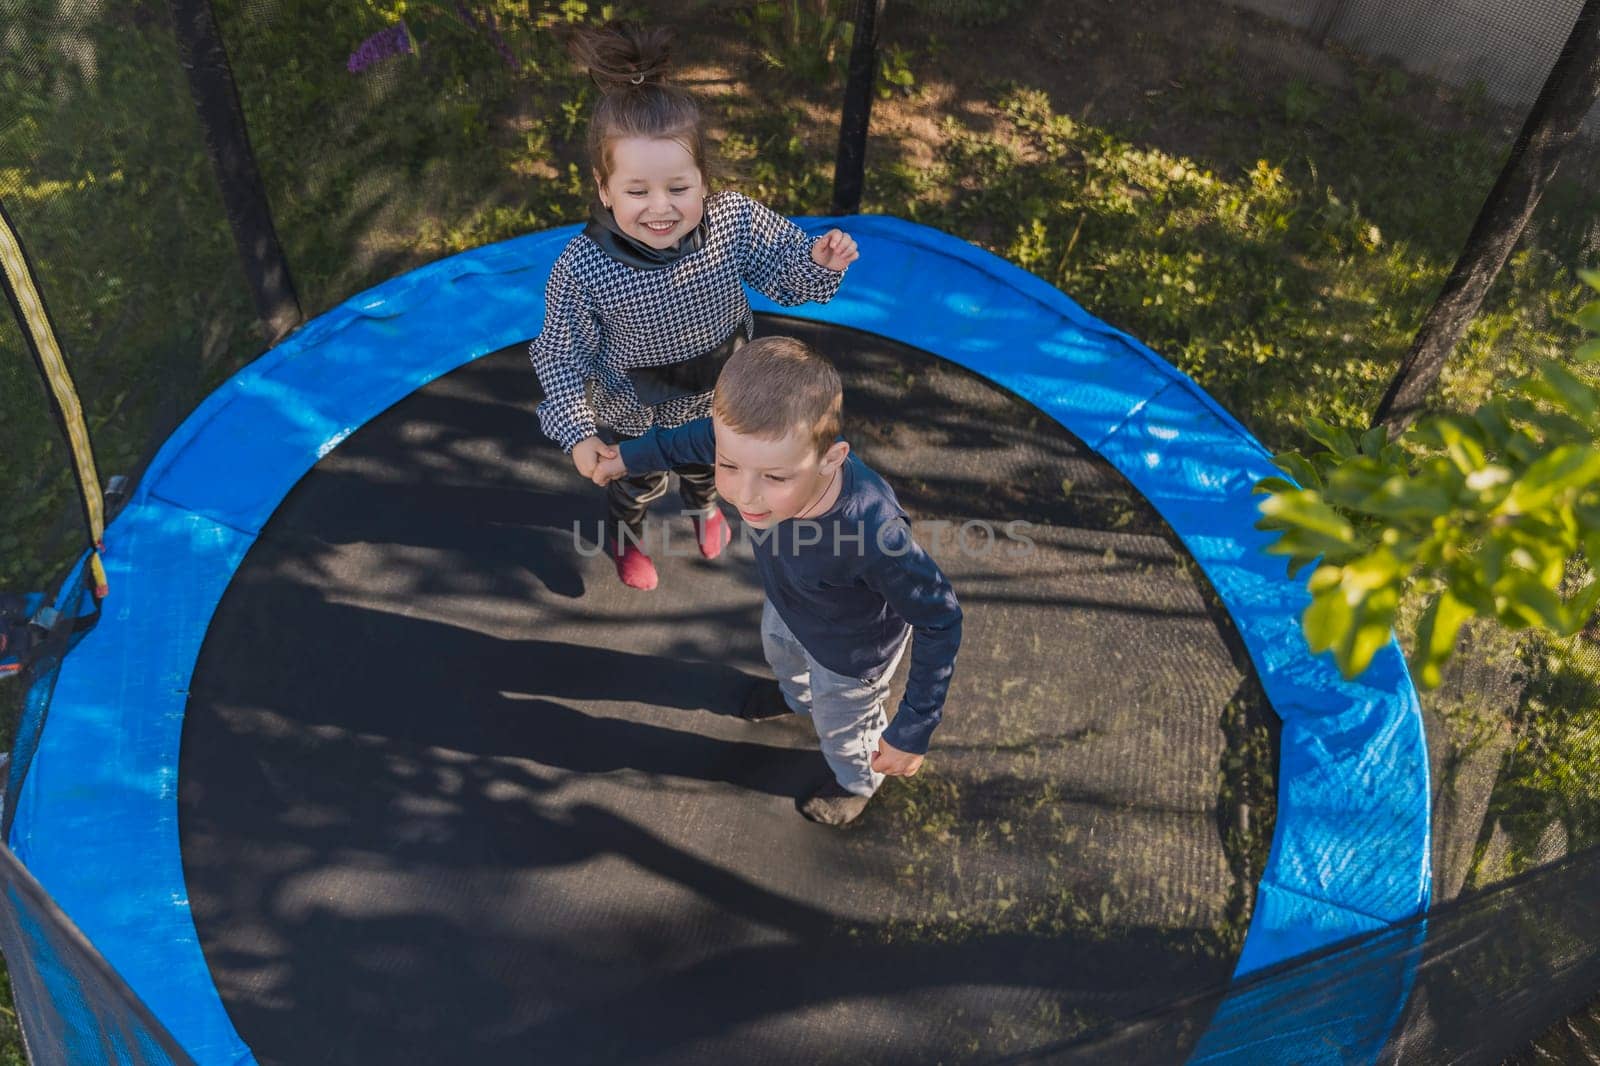 children jumping on a trampoline top view